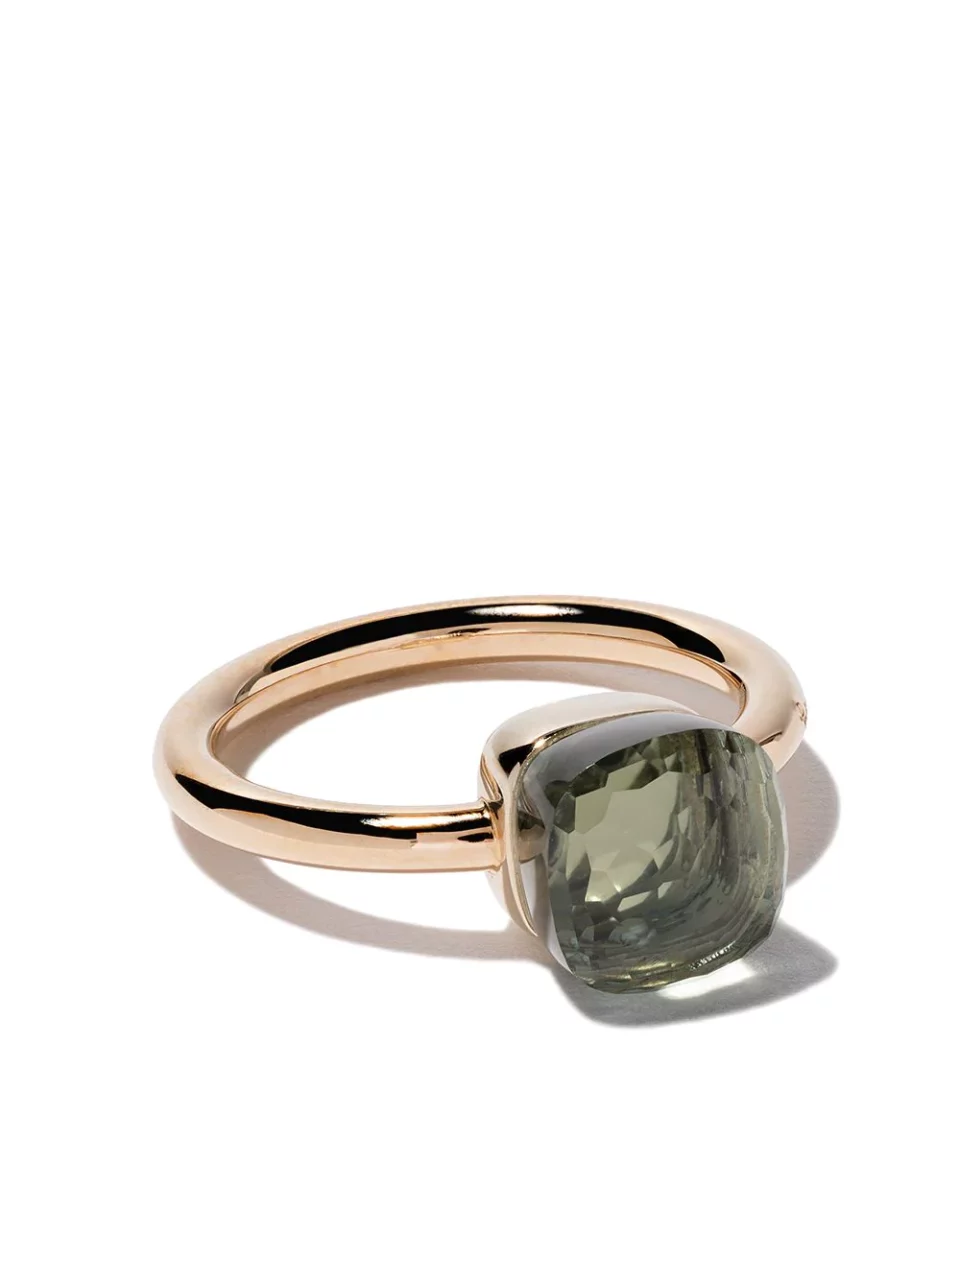 Promise ring by Pomellato